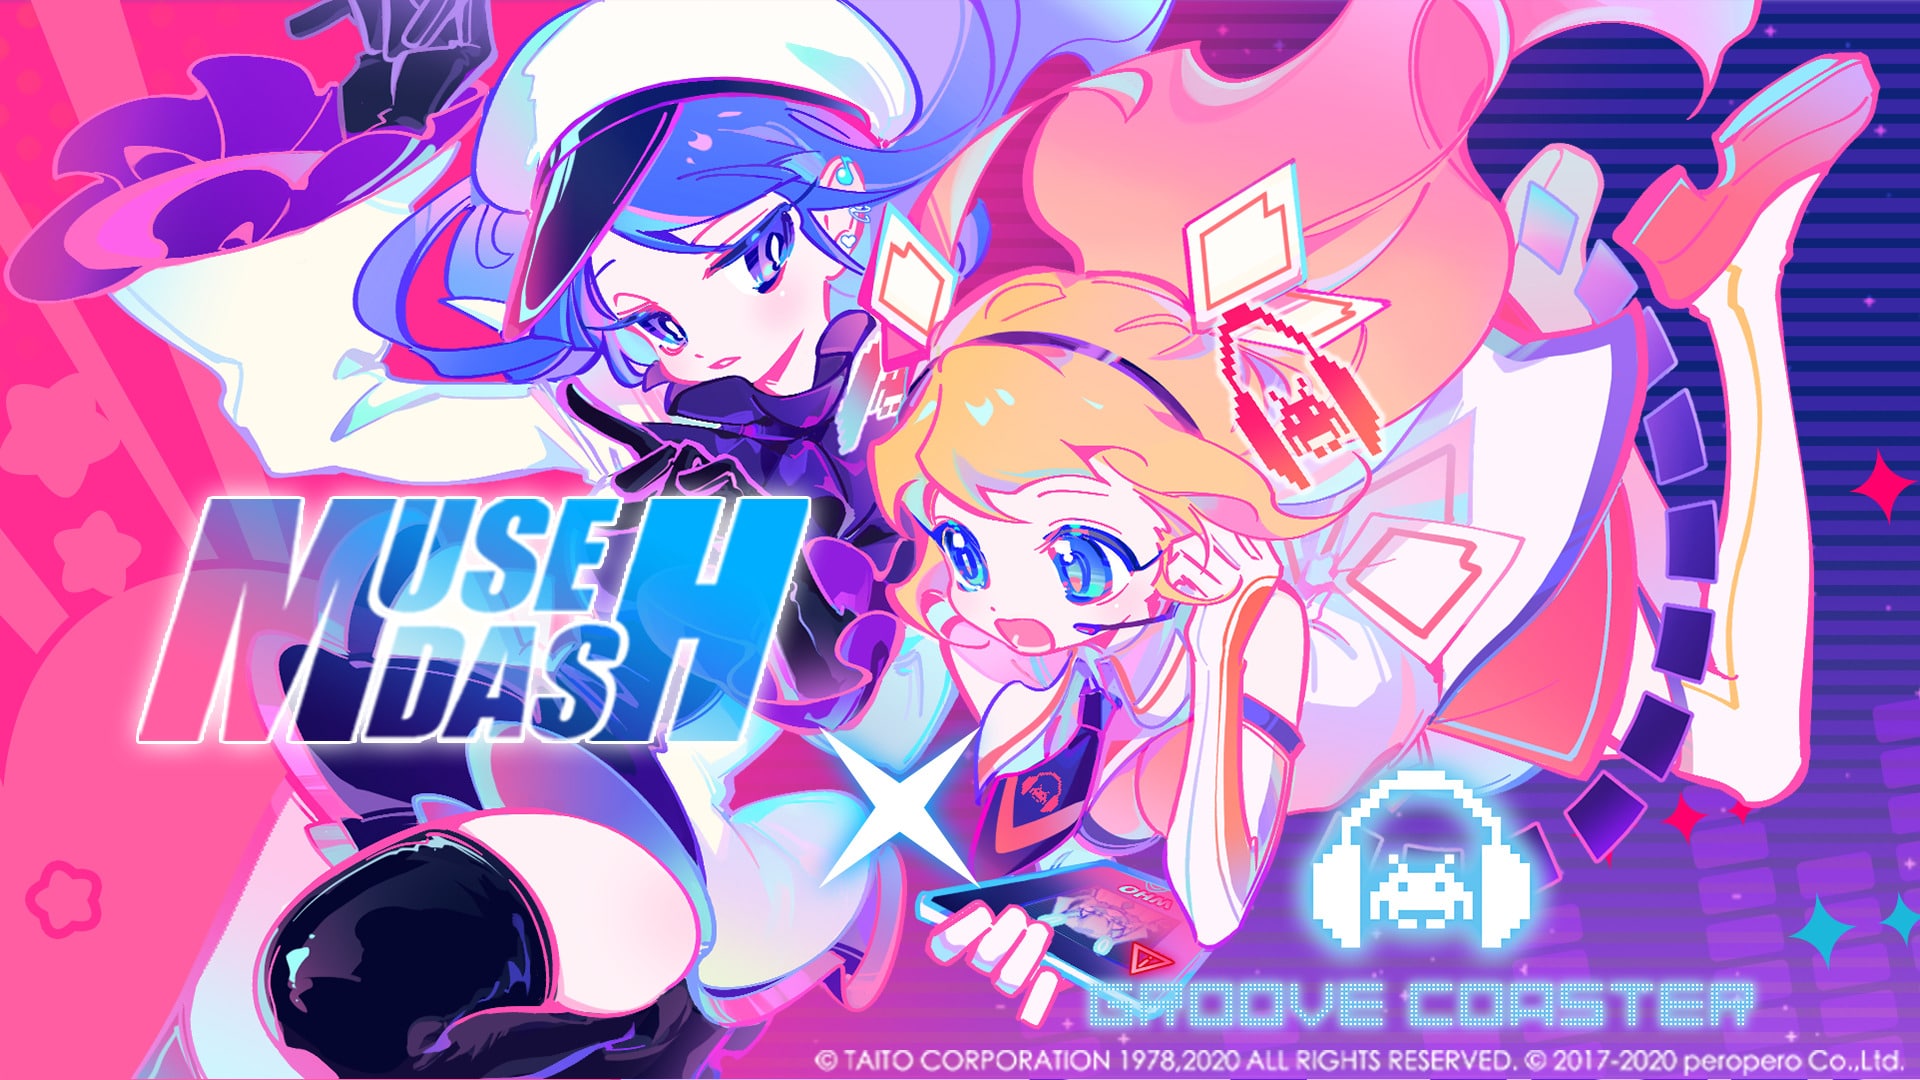 Waifu Rhythm Game ‘Muse Dash’ Reveals Groove Coaster Collaboration in New Trailer